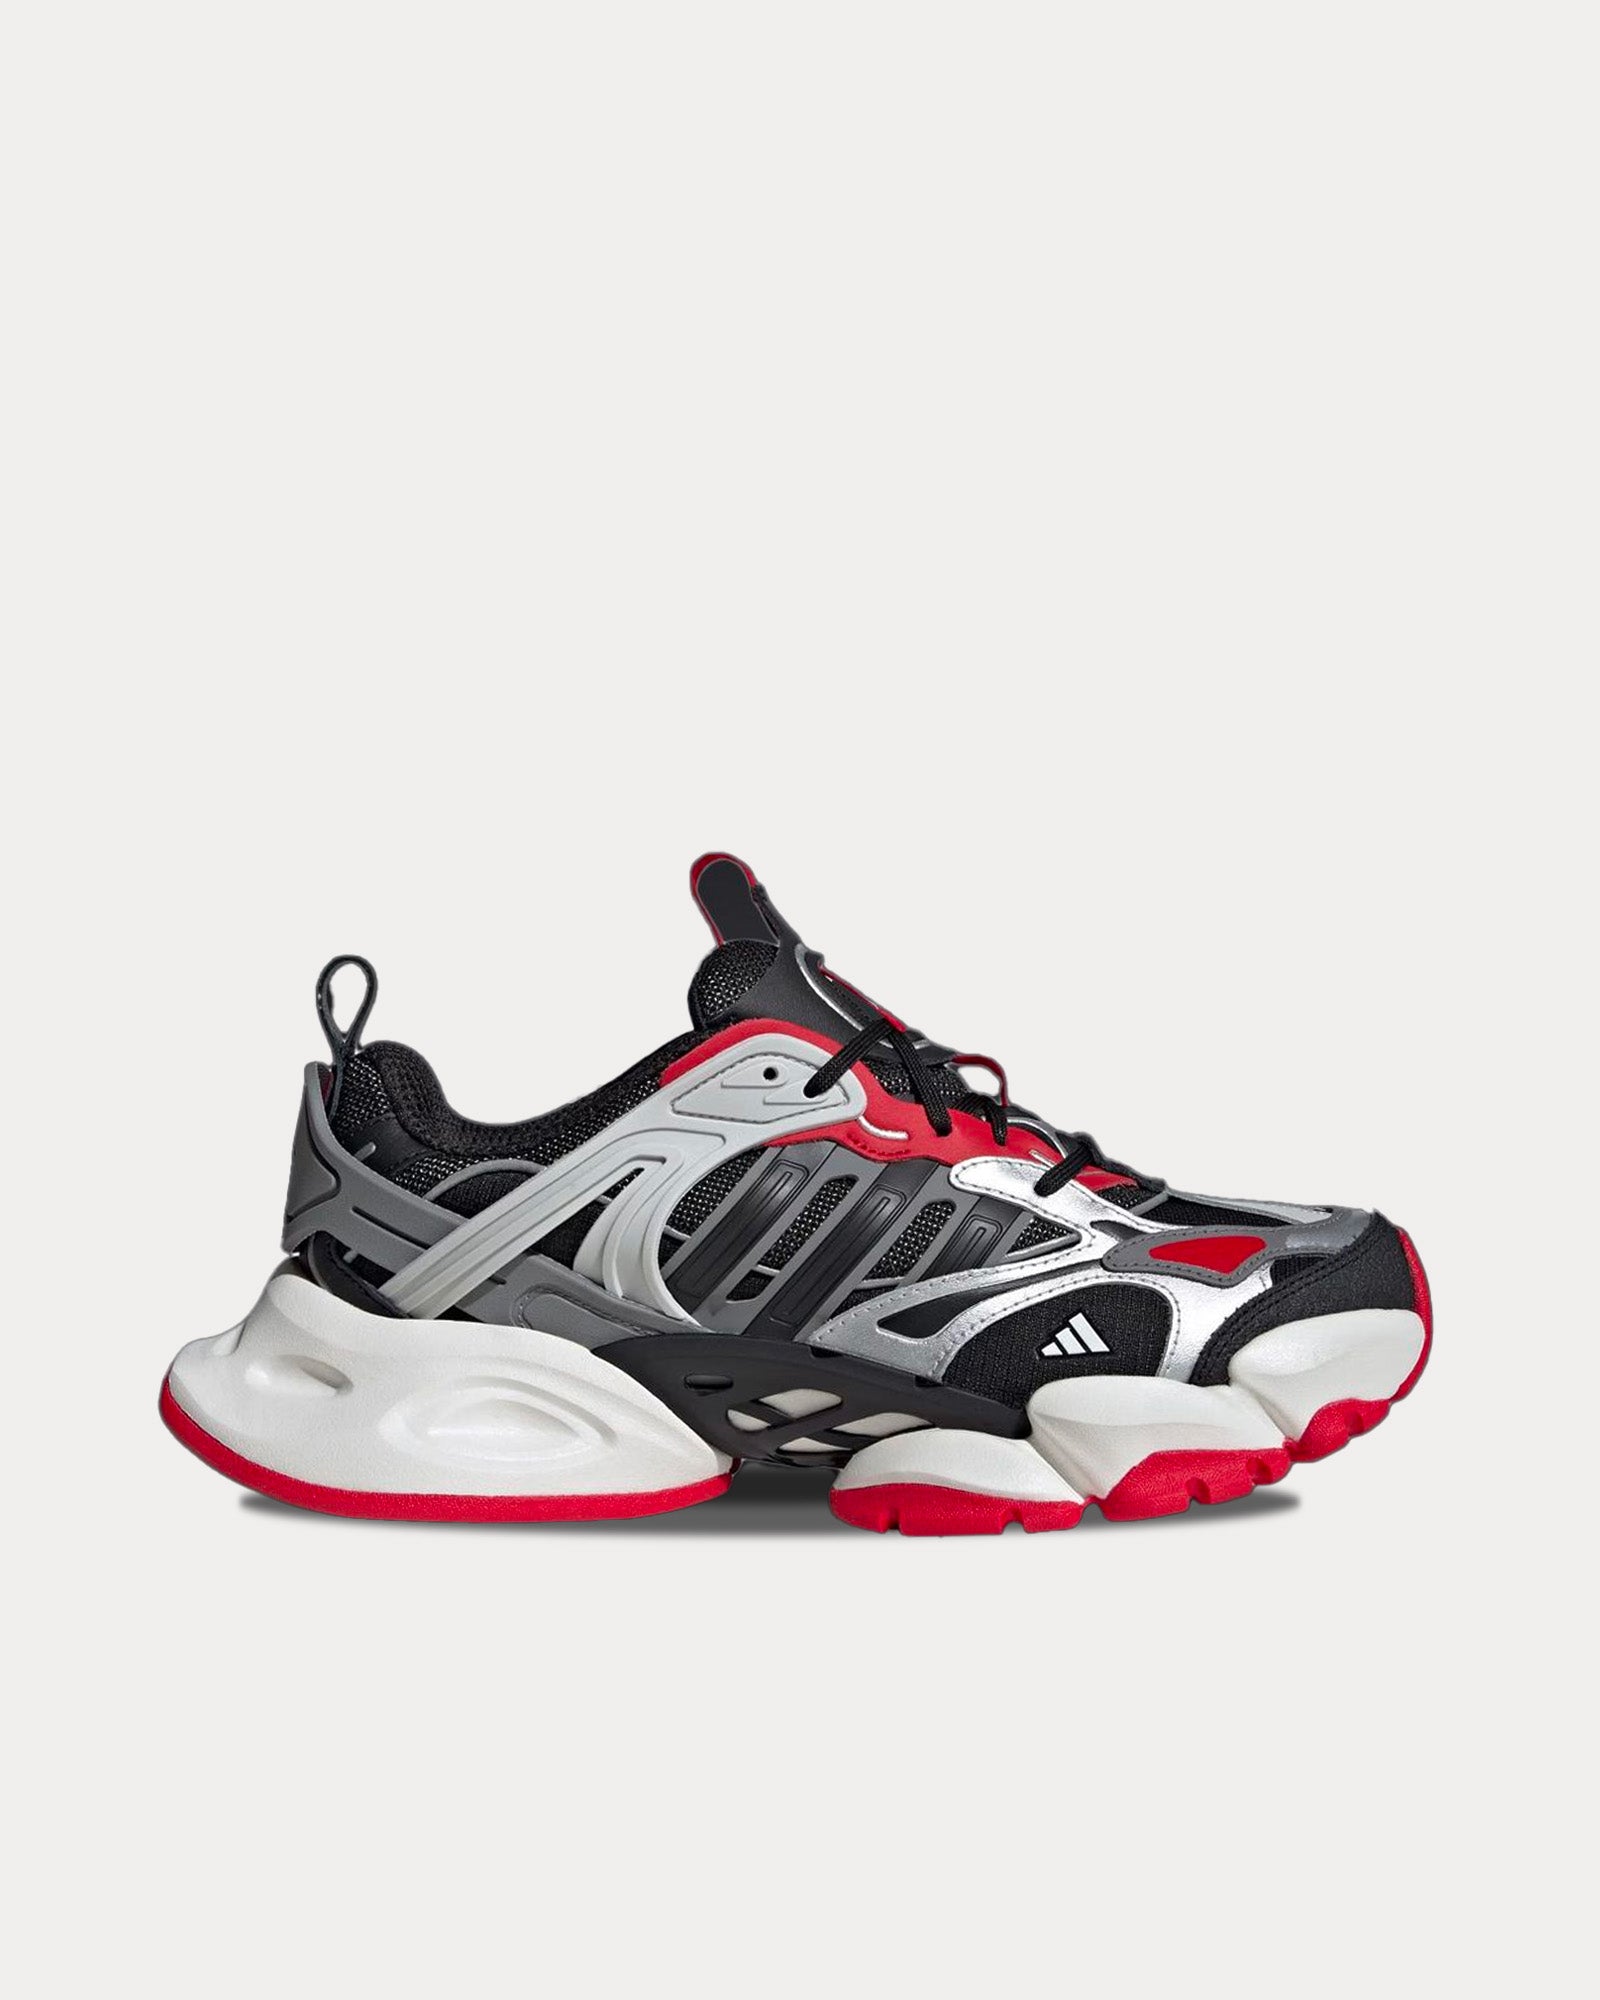 Adidas - Vento XLG Deluxe Black / Red Low Top Sneakers